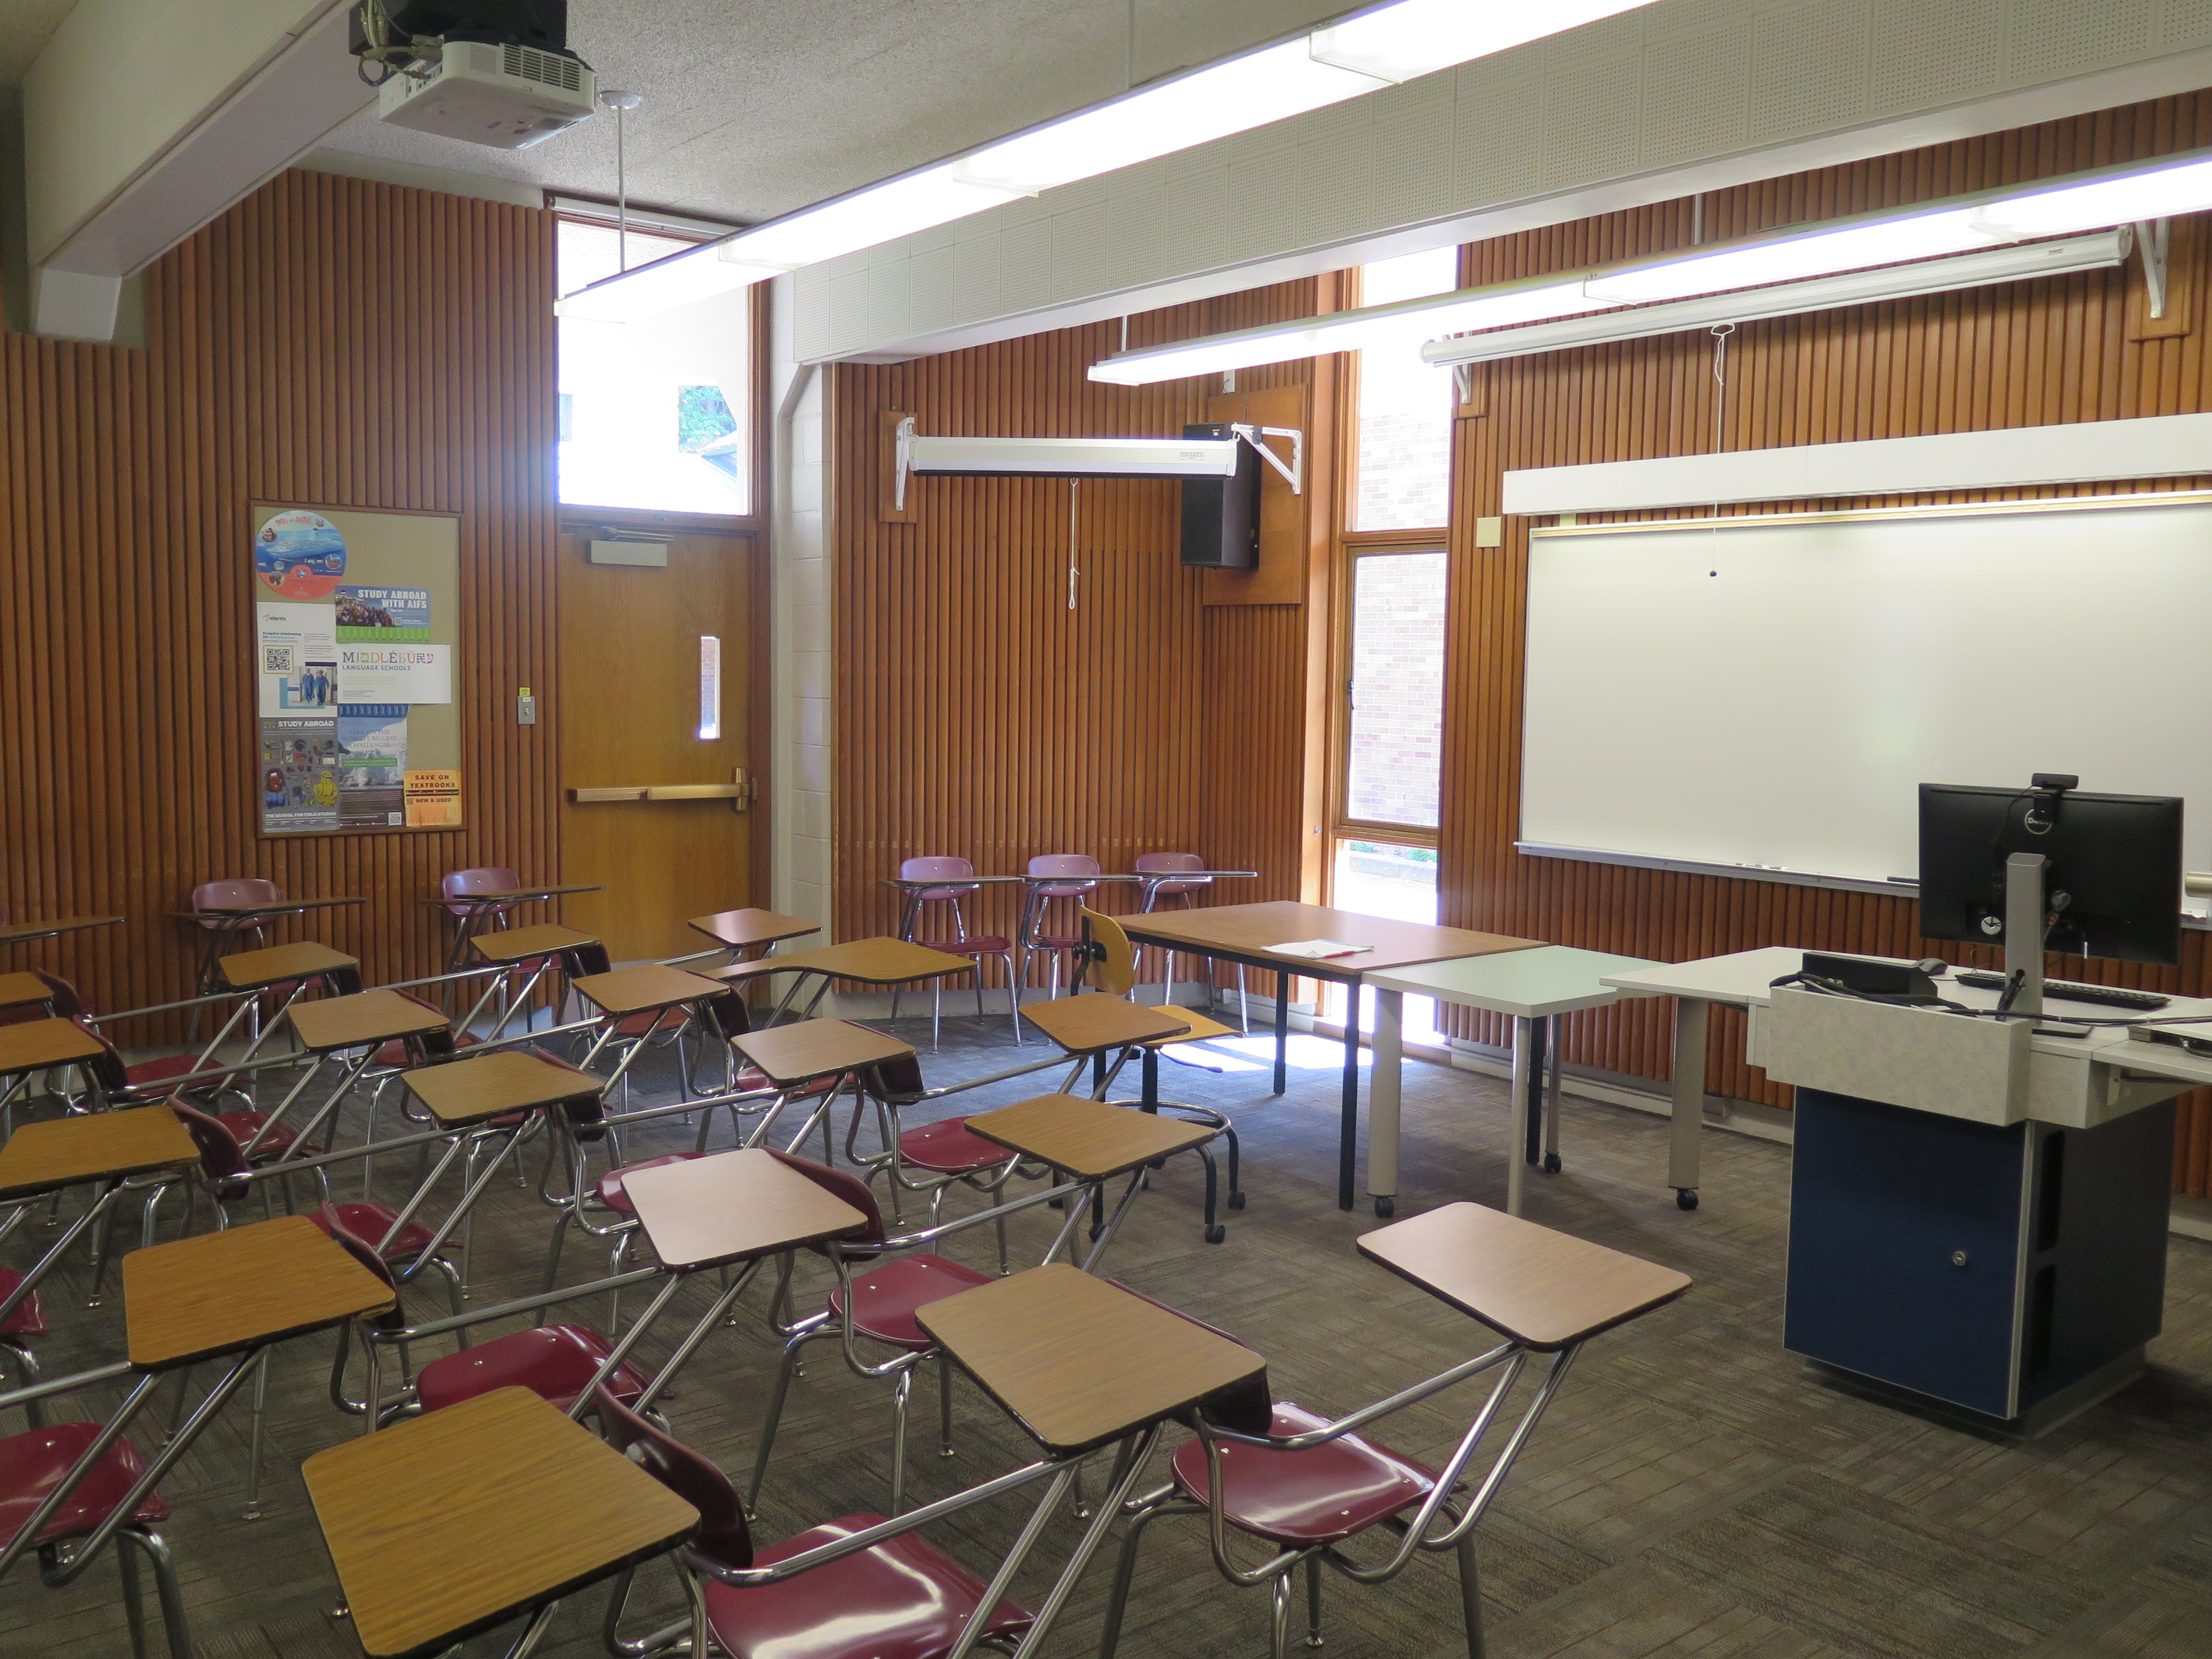 This room contains carpet floor, woods desks connected to chairs, a whiteboard at the front of the room and a podium 